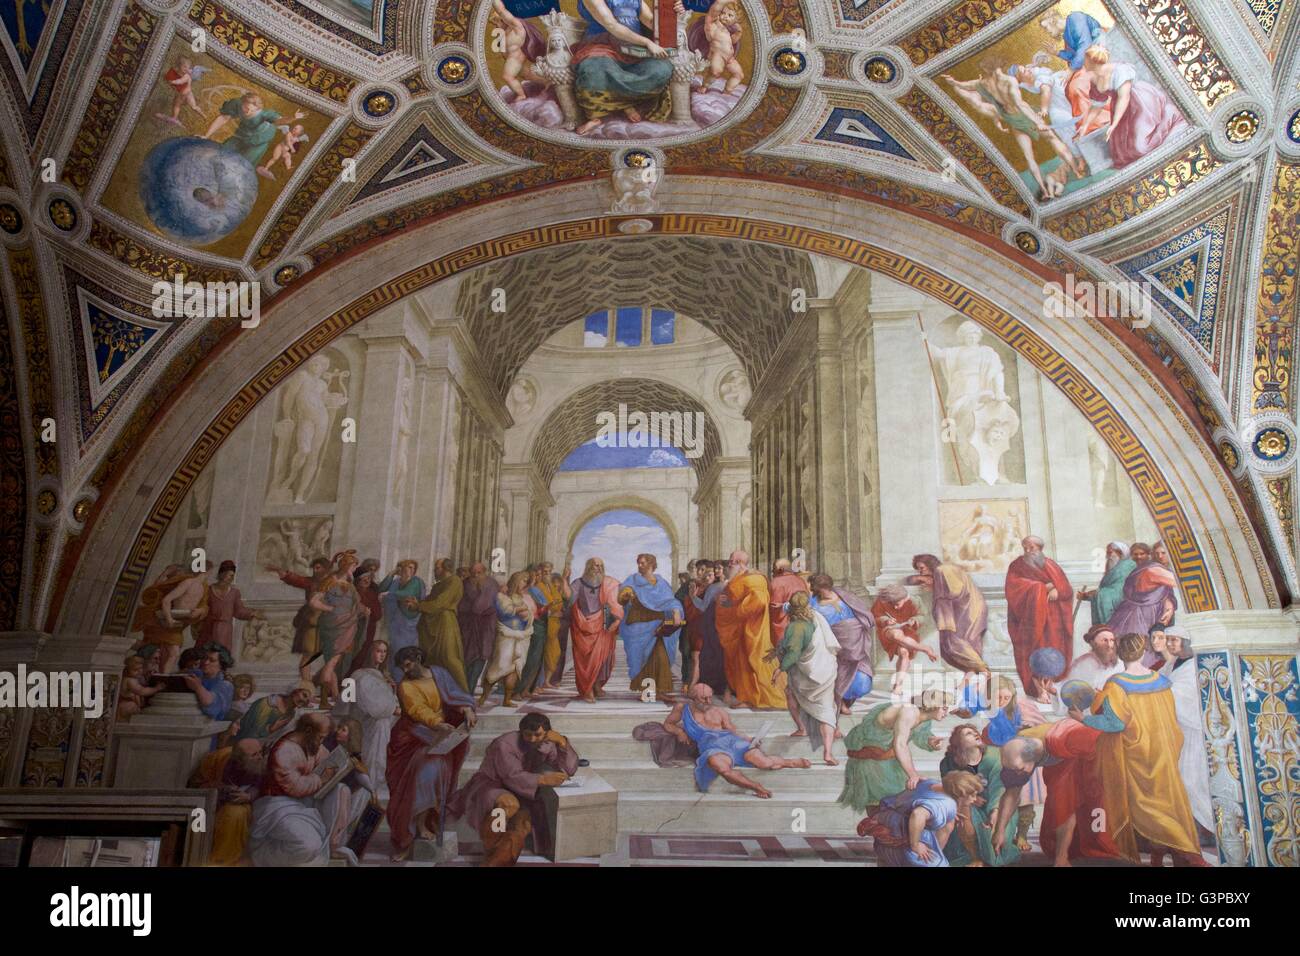 The School of Athens, by Raphael, 1509, Room of the Signature, Raphael Rooms, Apostolic Palace, Vatican Museums, Rome, Italy Stock Photo